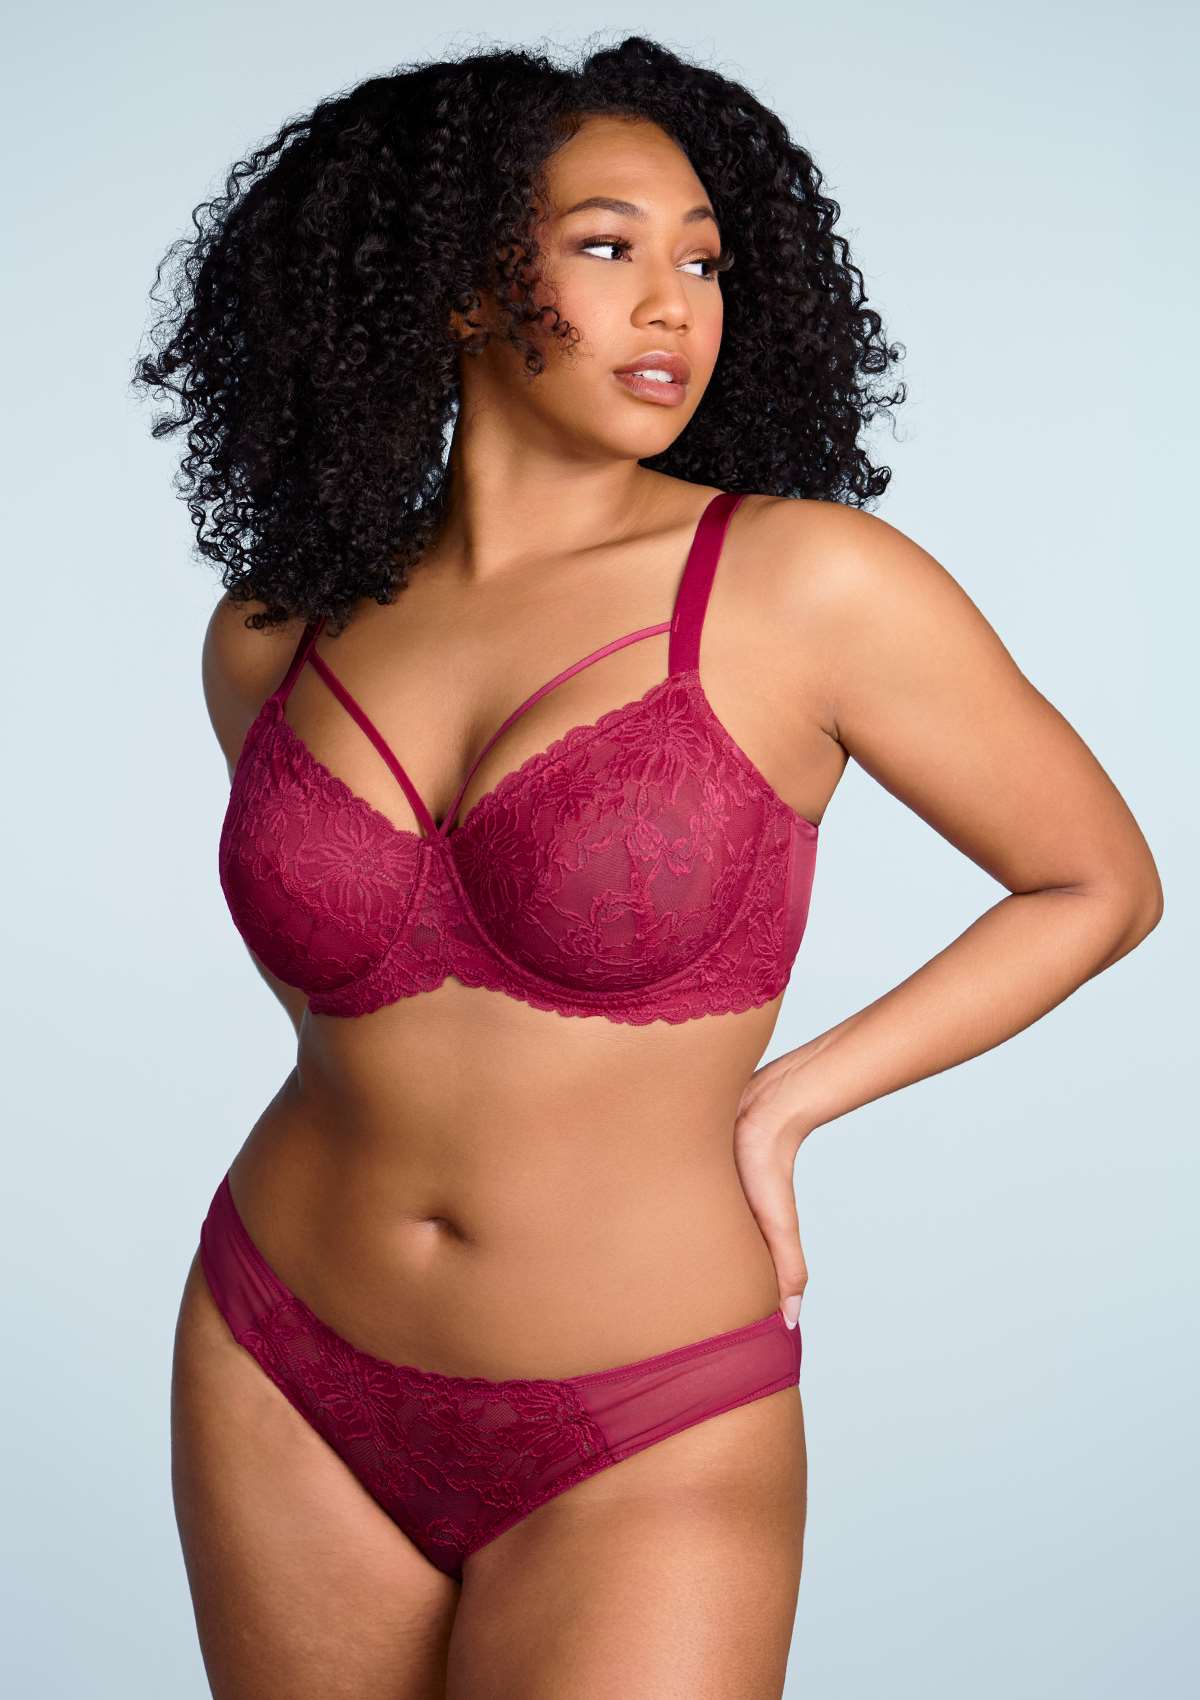 HSIA Pretty In Petals Lace Panties And Bra Set: Plus Size Women Bra - Red / 32 / C